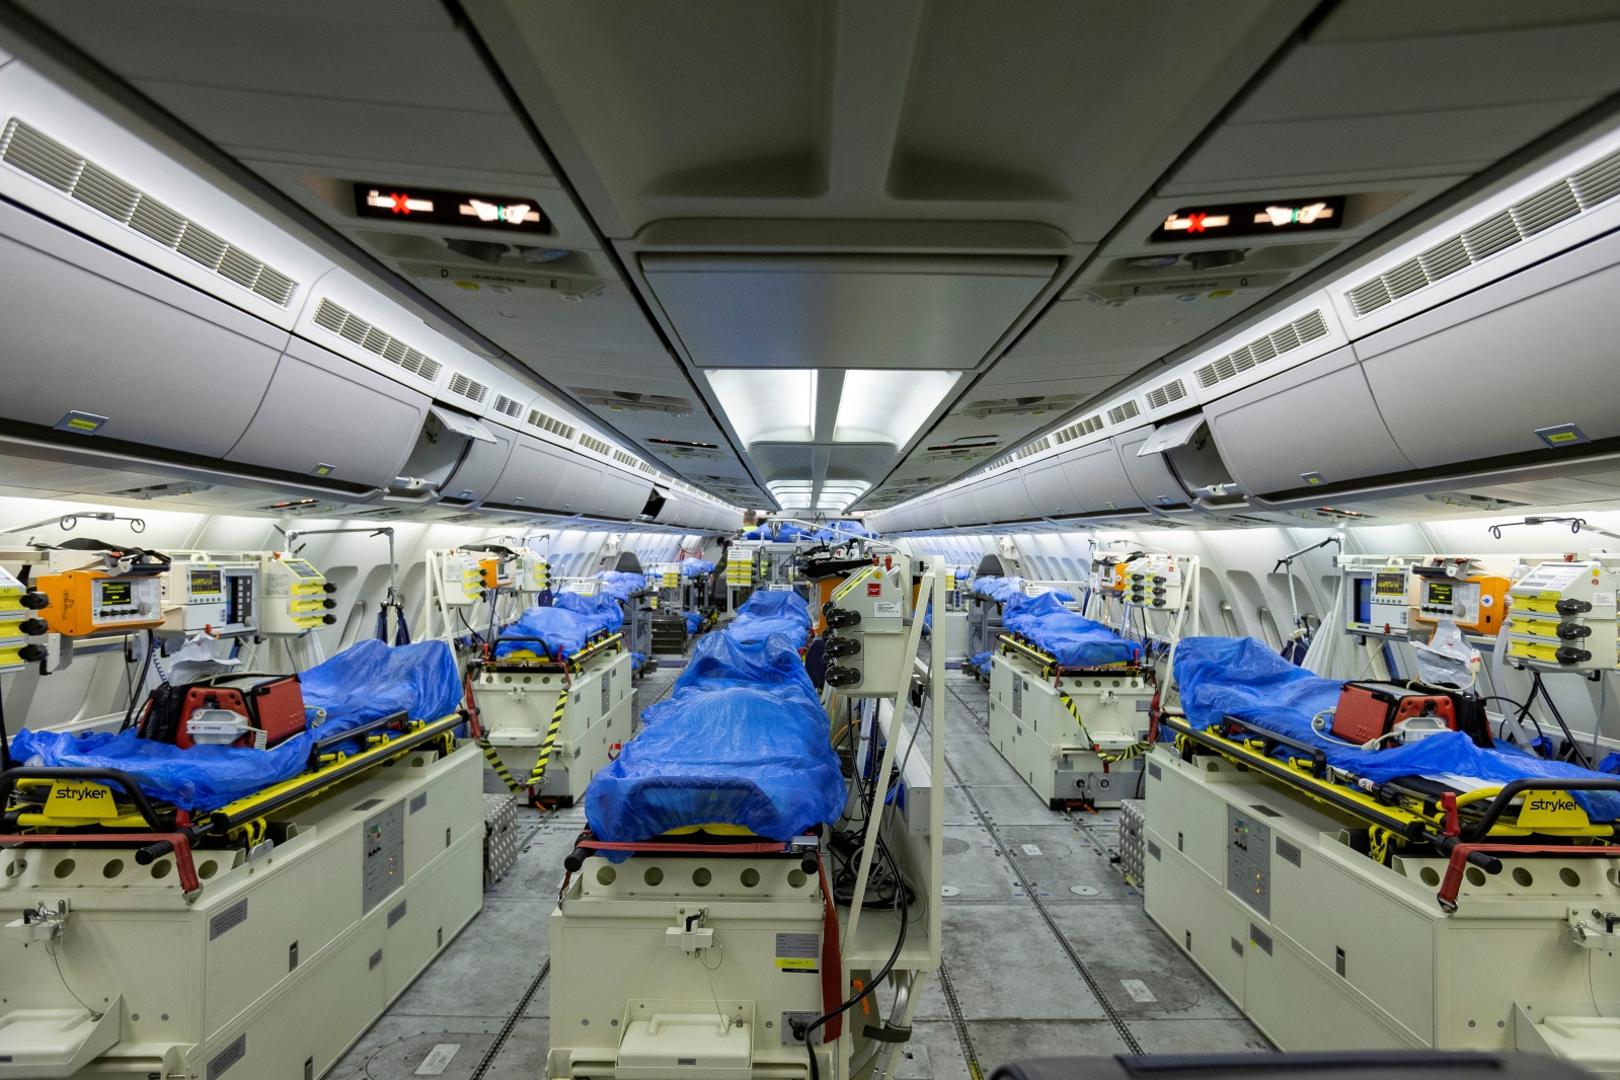 German air force Airbus A-310 Medivac A Bundeswehr handout photo shows the interior of their German air force Airbus A-310 "Medivac" before its departure to Bergamo, in Cologne, Germany, March 28, 2020, as the spread of the coronavirus disease (COVID-19) continues.     Bundeswehr/Kevin Schrief/Handout via Reuters ATTENTION EDITORS - THIS IMAGE HAS BEEN SUPPLIED BY A THIRD PARTY. NO RESALES. NO ARCHIVES. Bundeswehr/Kevin Schrief